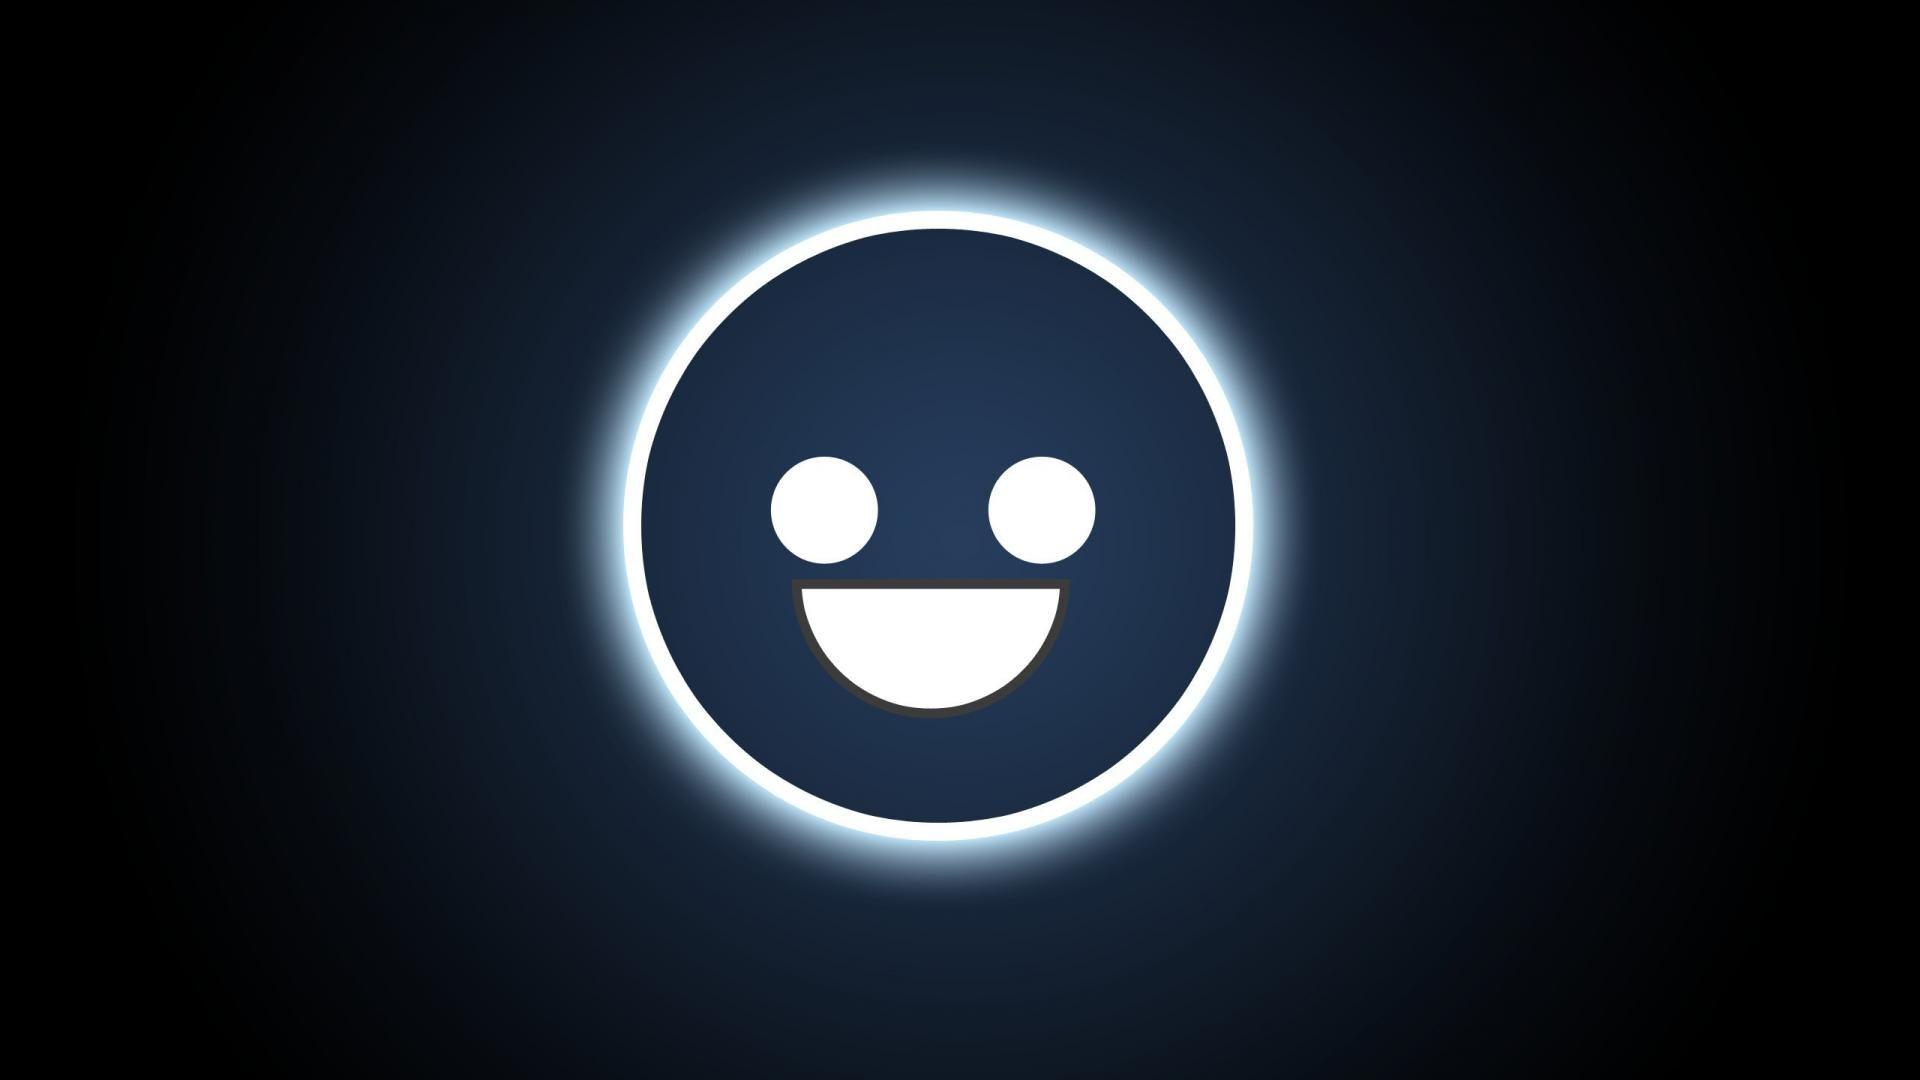 Smile old mobile, cell phone, smartphone wallpapers hd, desktop backgrounds  240x320 downloads, images and pictures